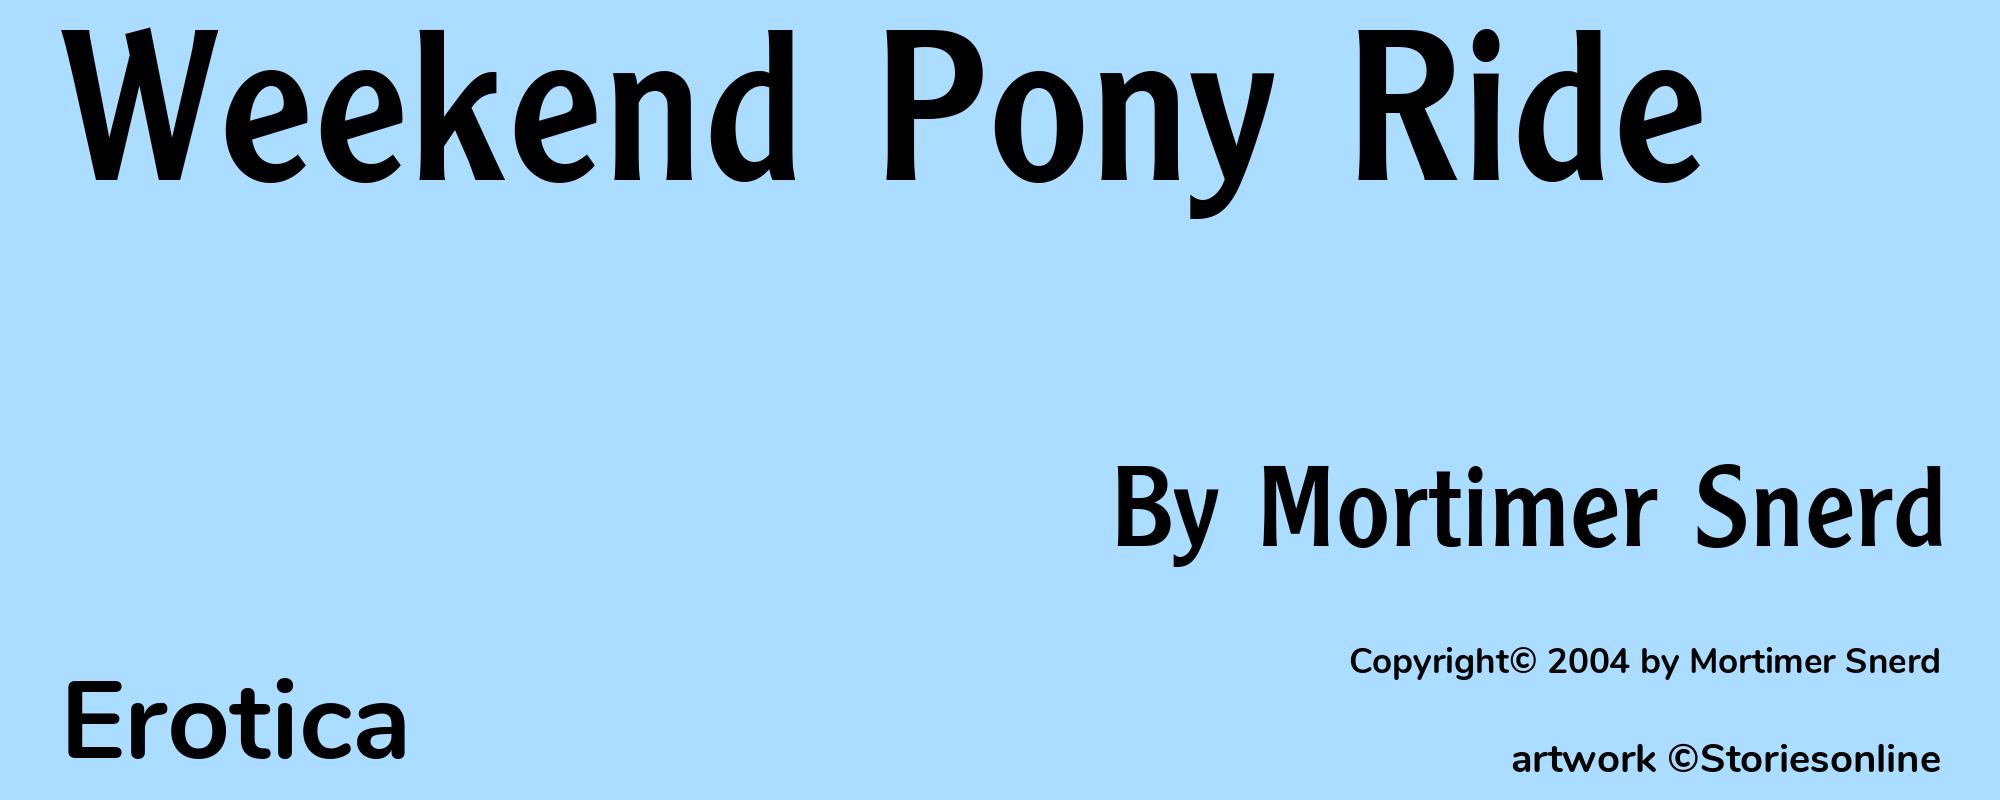 Weekend Pony Ride - Cover